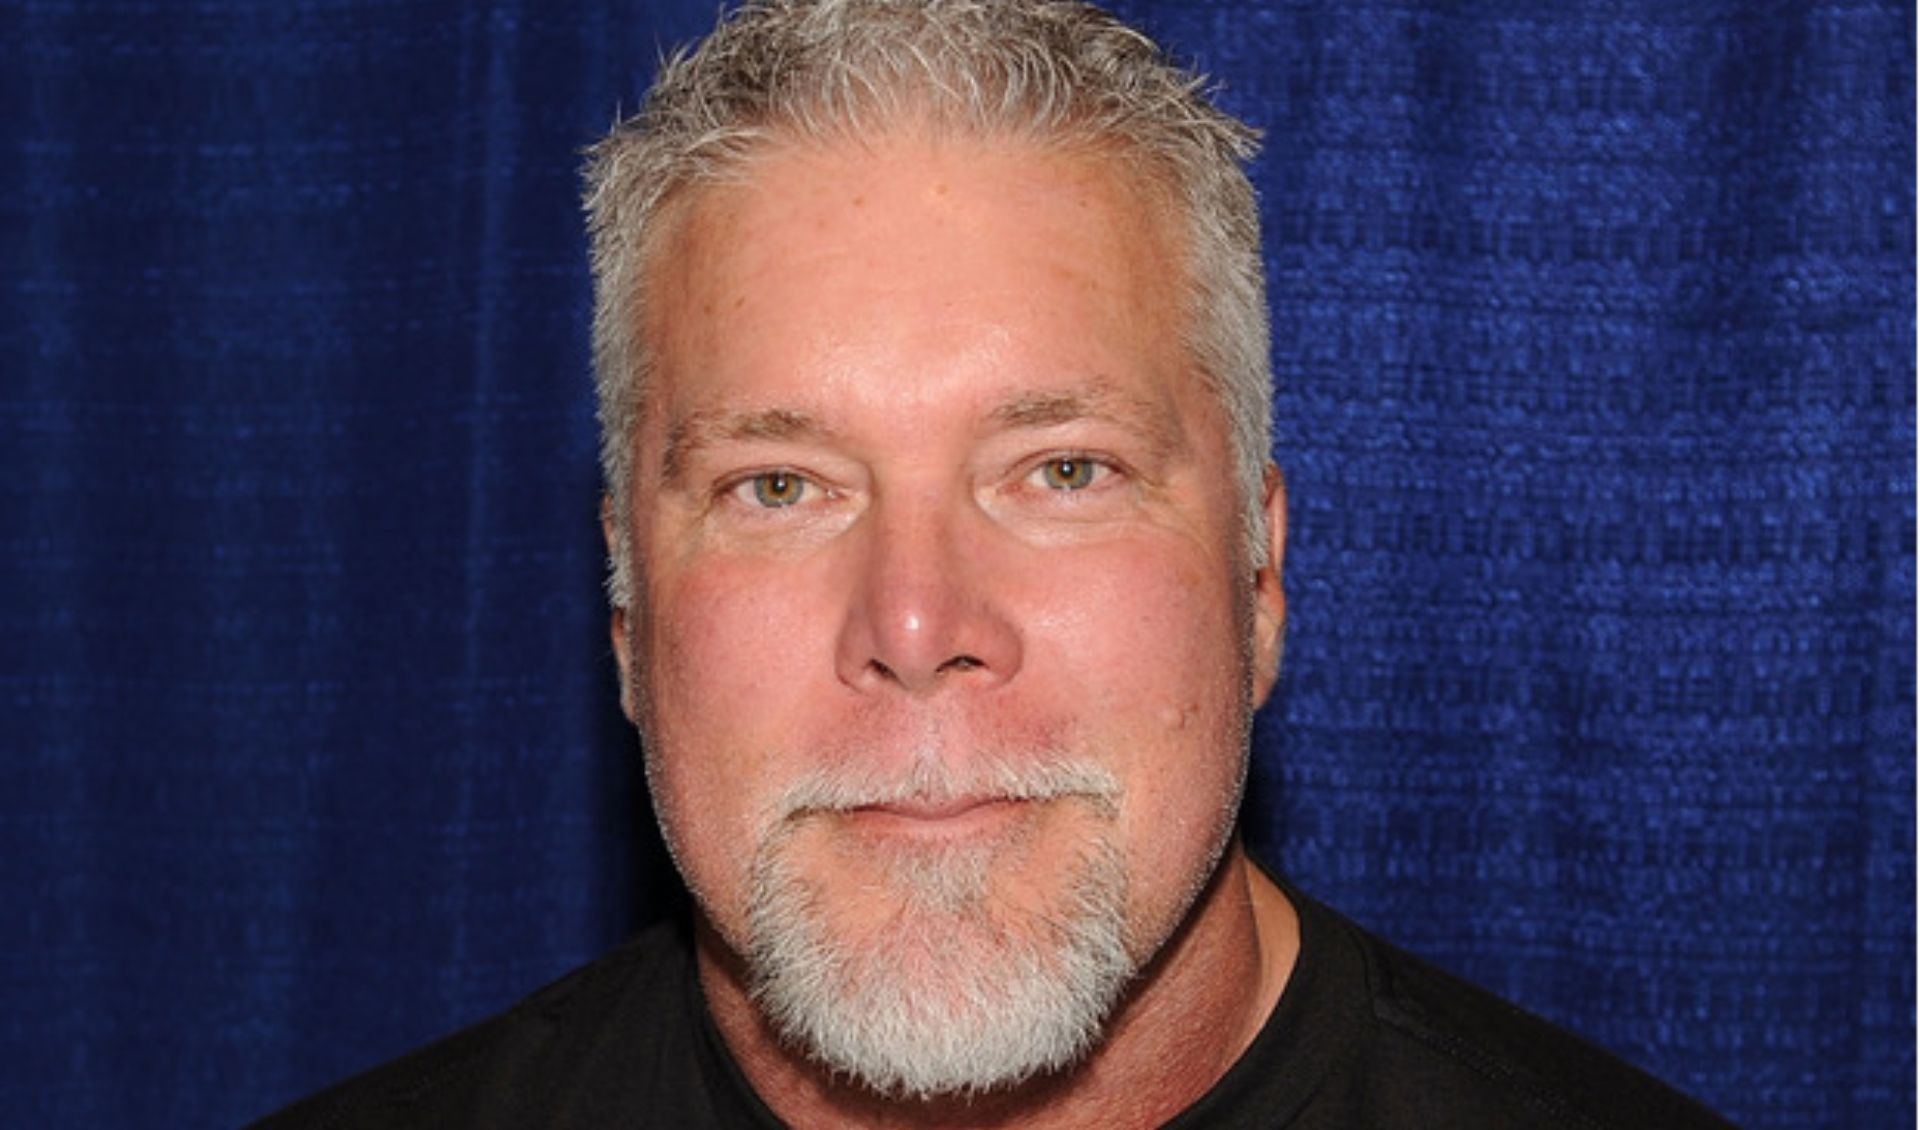 Kevin Nash is a two-time WWE Hall of Famer